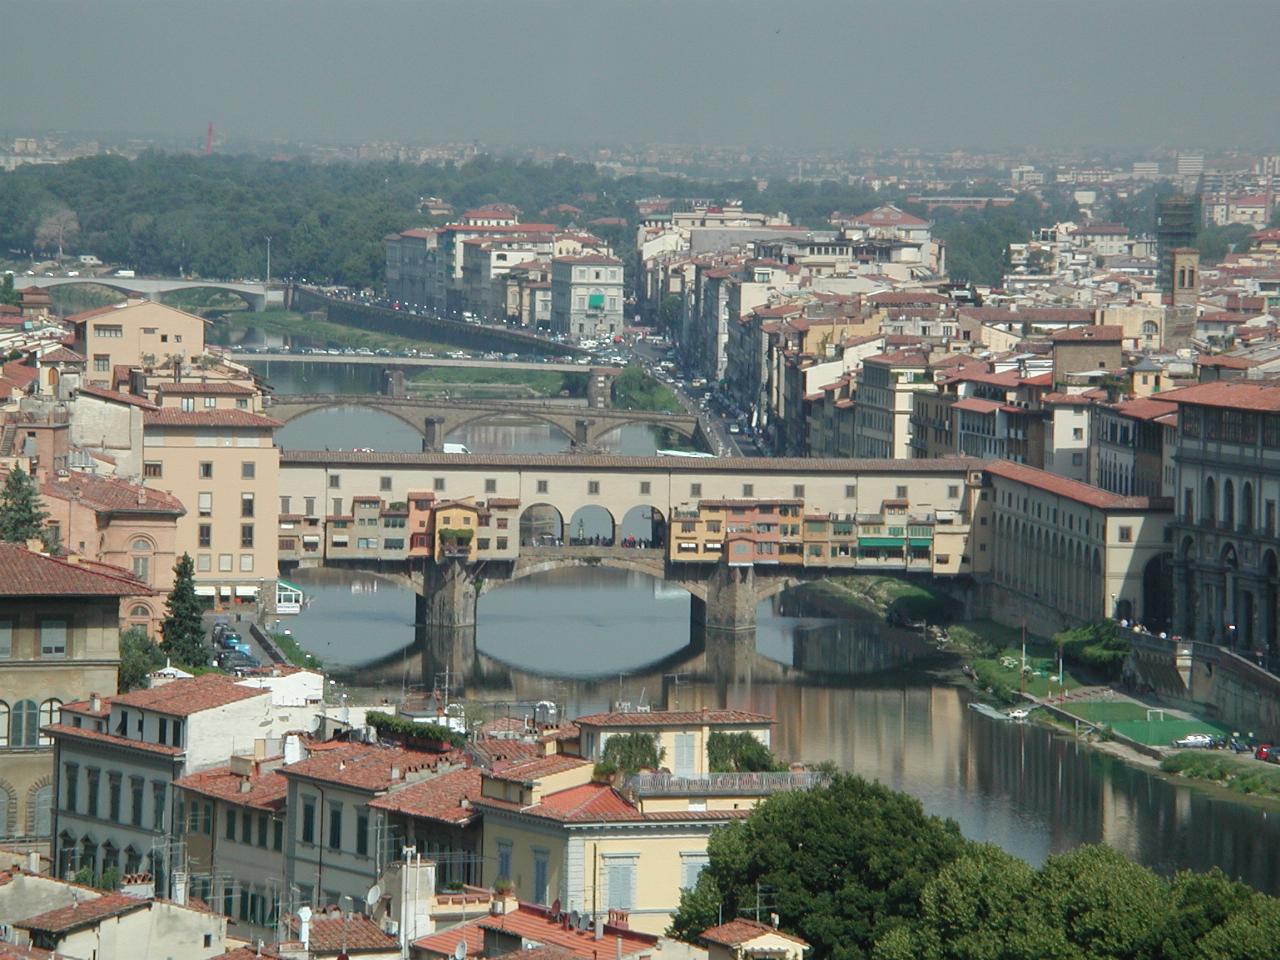 Ponte Vecchio and River Arno from Piazzale Michelangelo